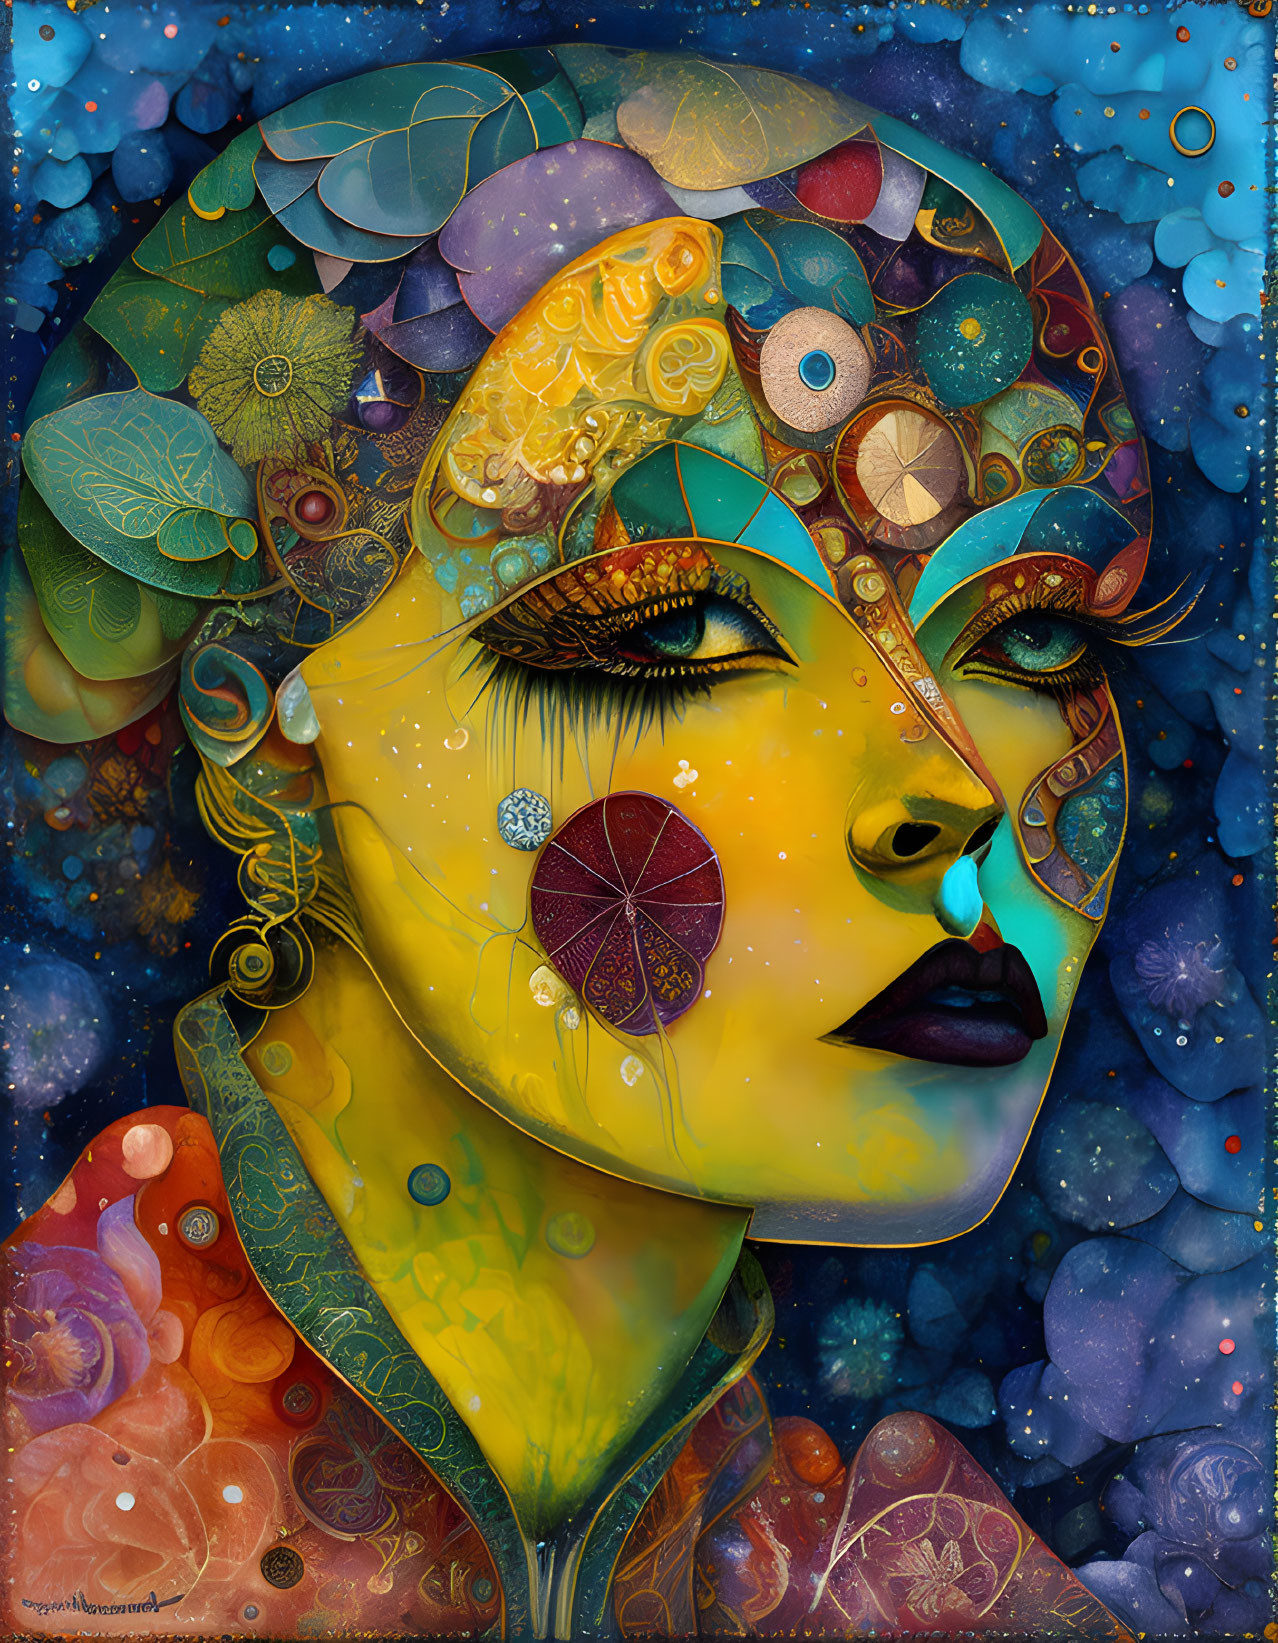 Colorful surreal portrait of a woman with mosaic patterns on face in cosmic setting